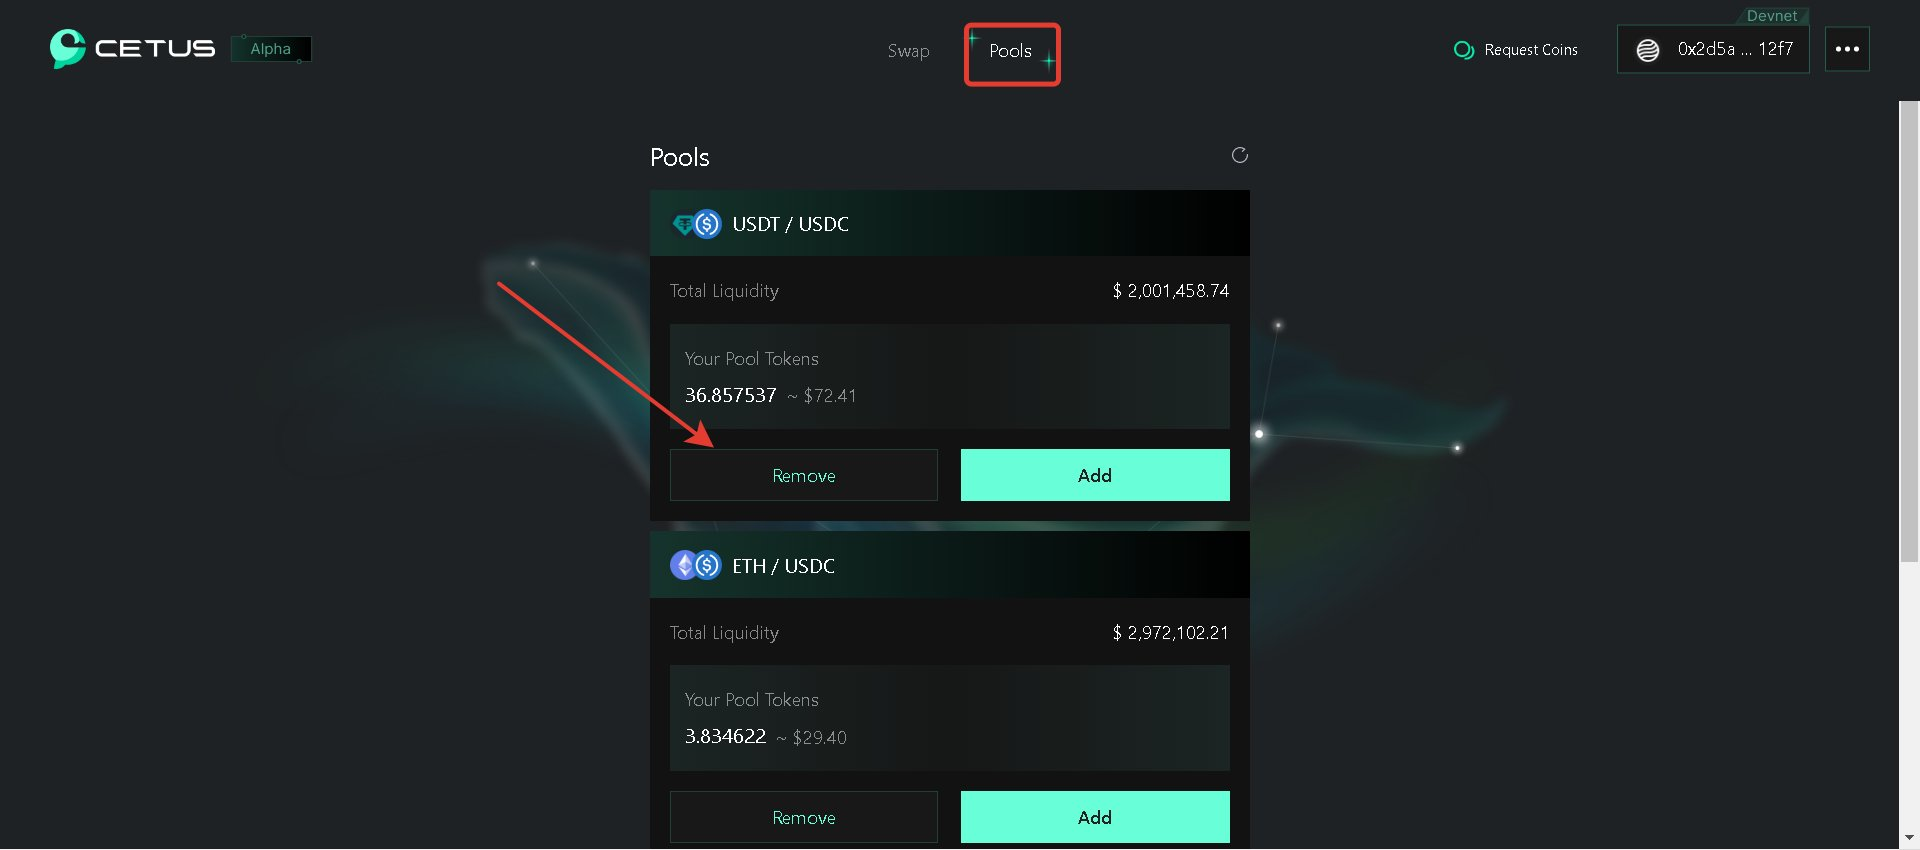 Return to the "Pool" tab and withdraw liquidity with the "Remove" button.